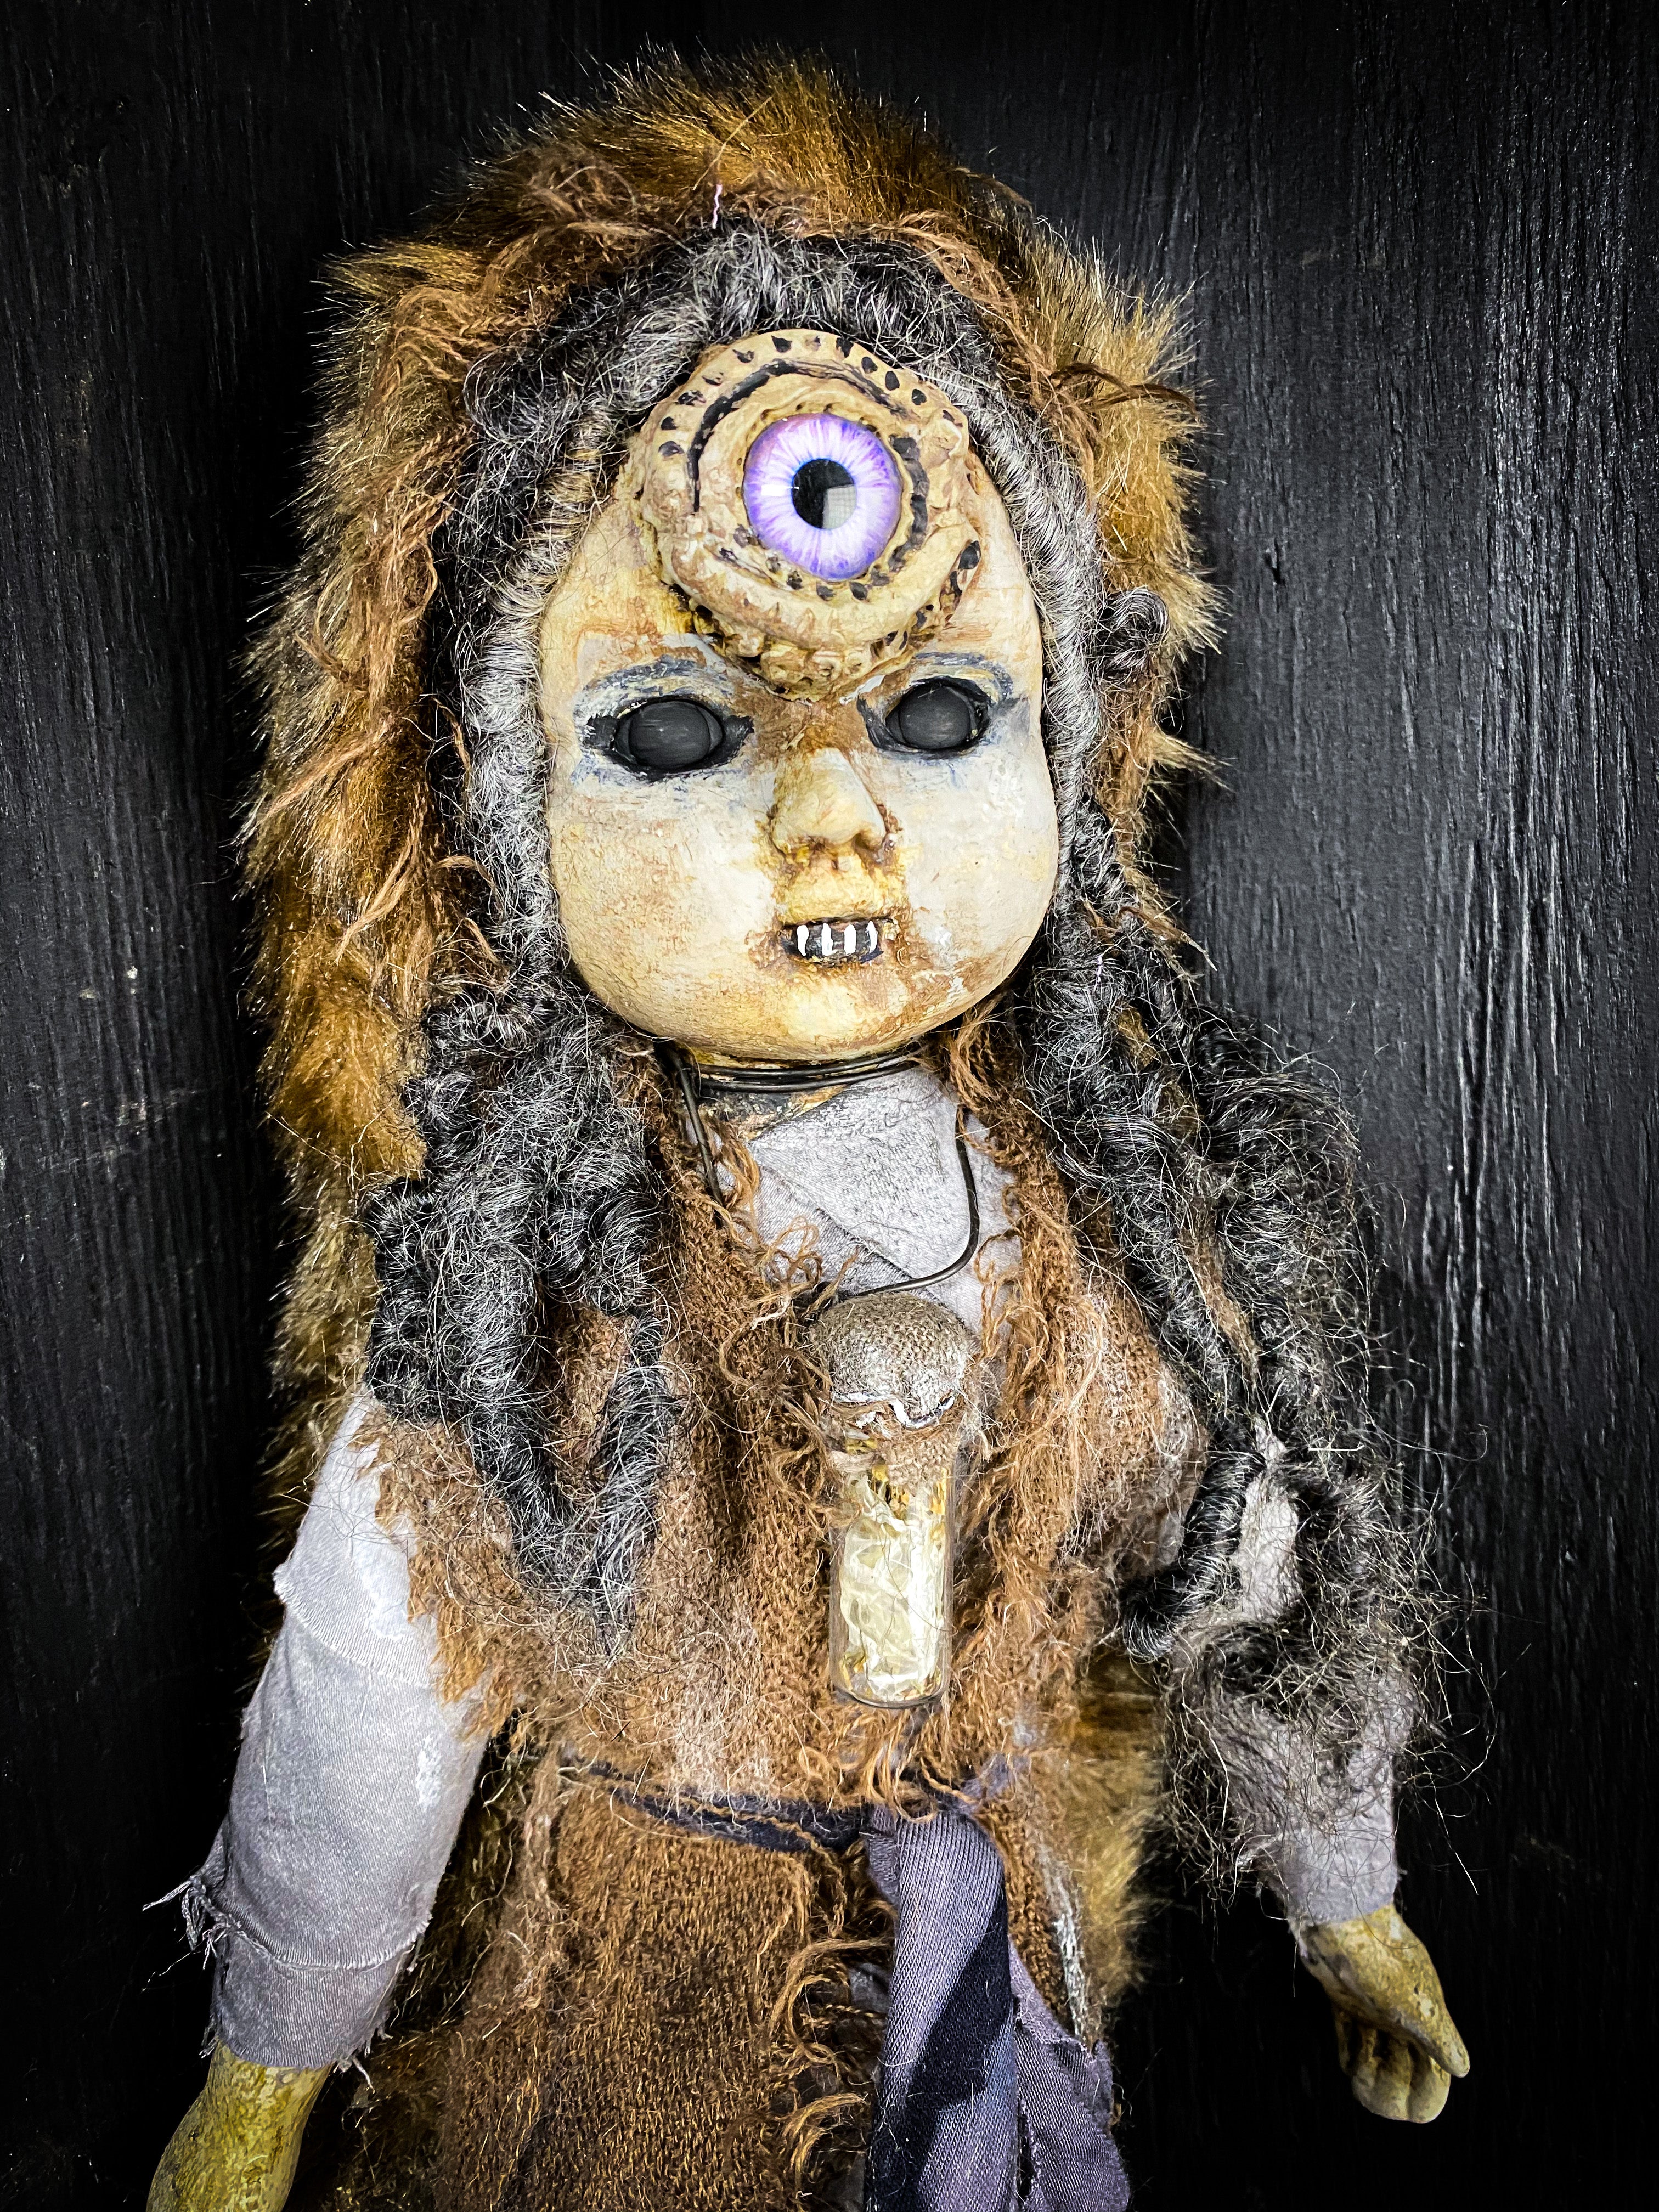 SHE WHO KNOWS - Spirit Doll